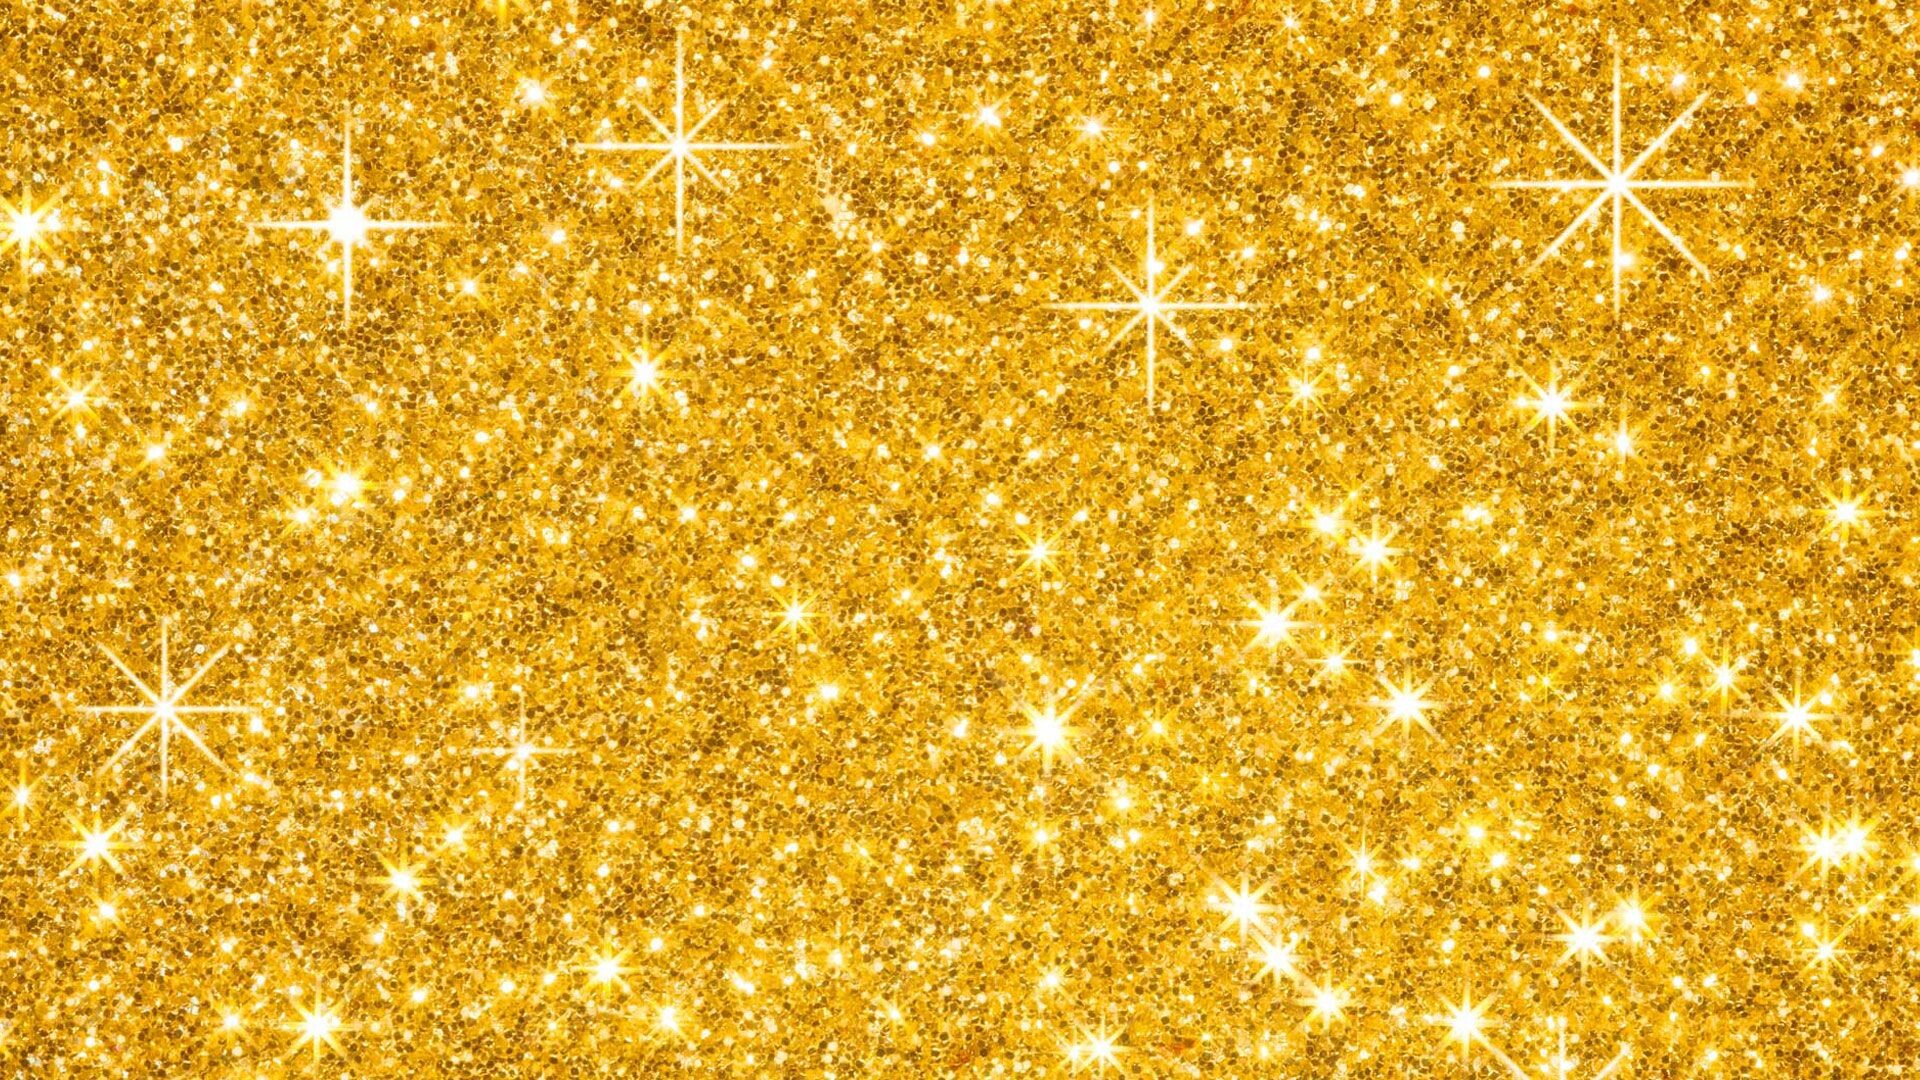 Gold Sparkle: Sparkling powder, A super fine loose glitter, Shining brightly with little flashes of light. 1920x1080 Full HD Wallpaper.